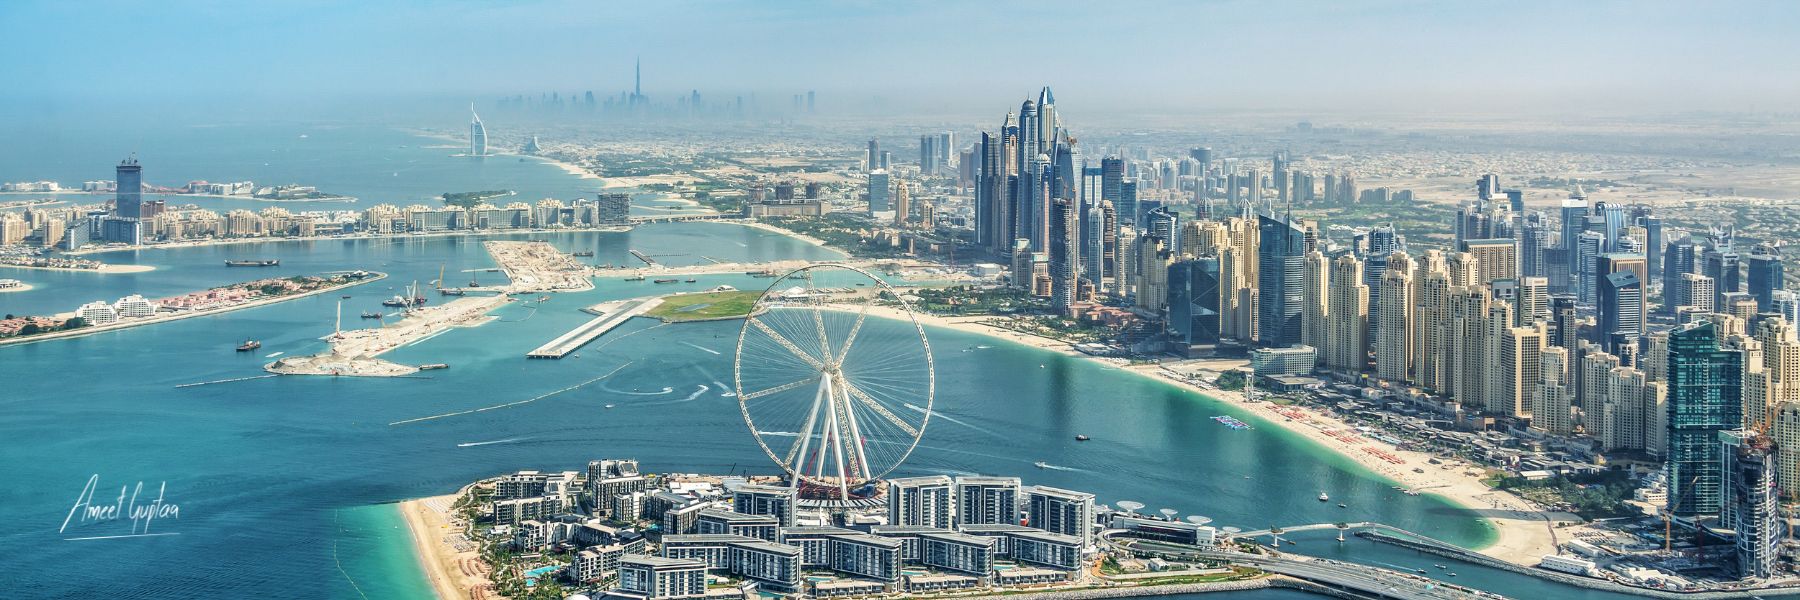 Understanding-Dubai’s-E-commerce-Landscape-in-2024-The-Ultimate-Guide-How-to-Start-an-E-commerce-Business-in-Dubai-in-2024-Ameet-Guptaa